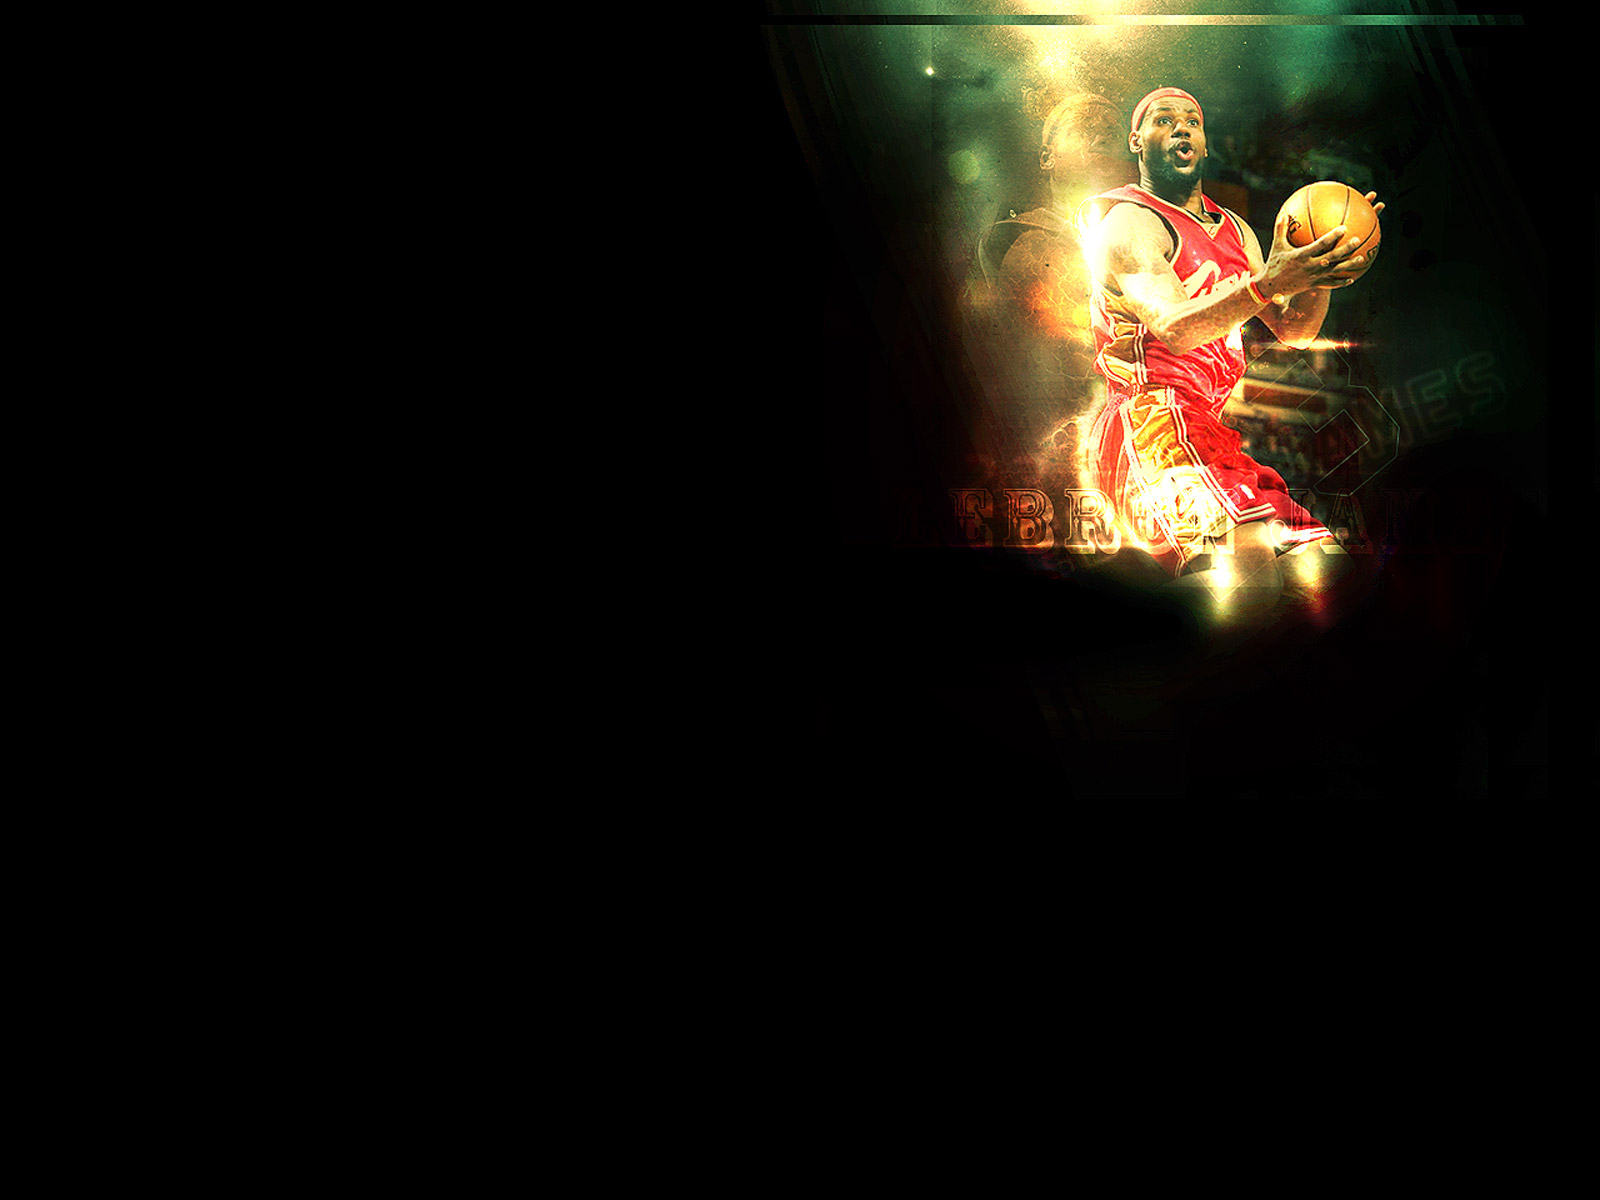 Size: 1600x1200, Posted in: USA / NBA -> LeBron James